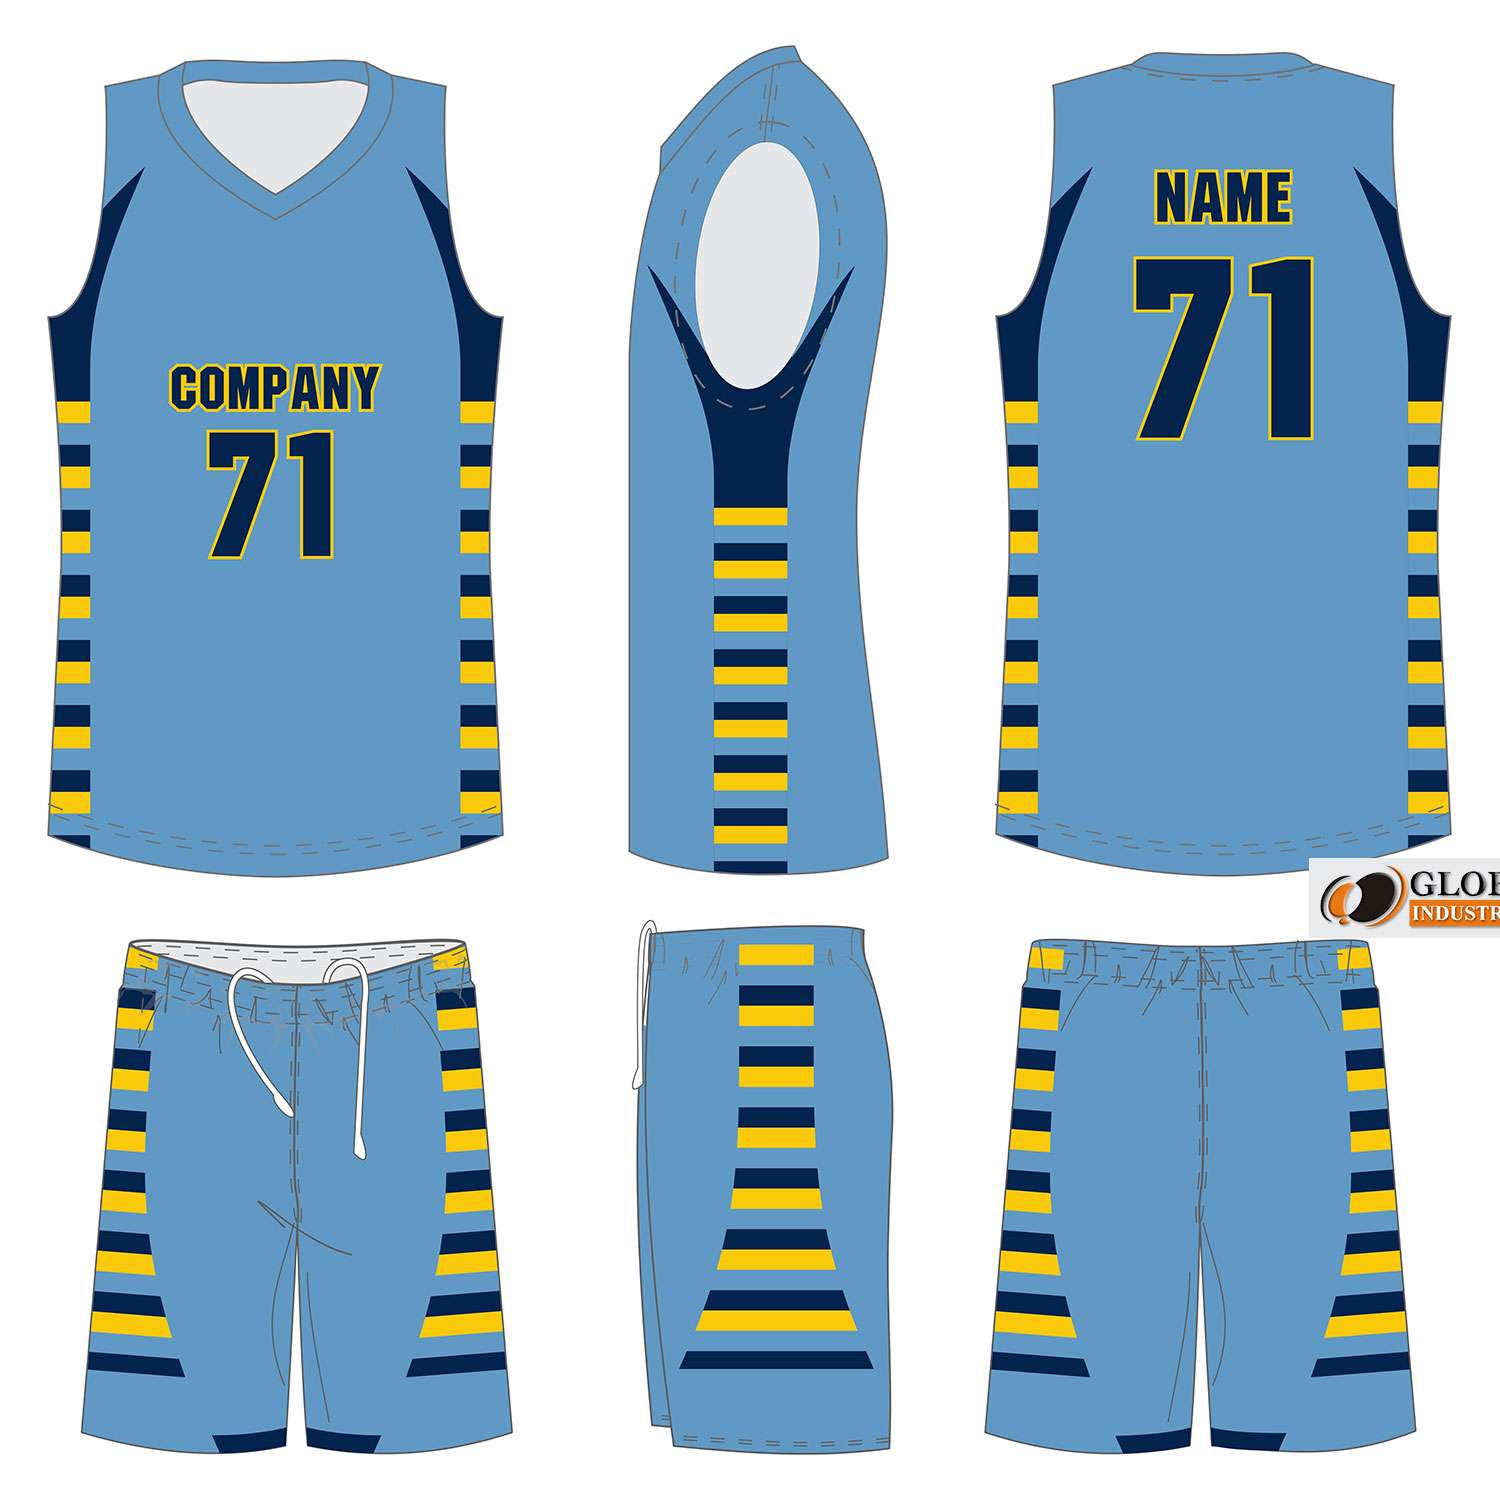 Old basketball uniforms through history showcase iconic designs.